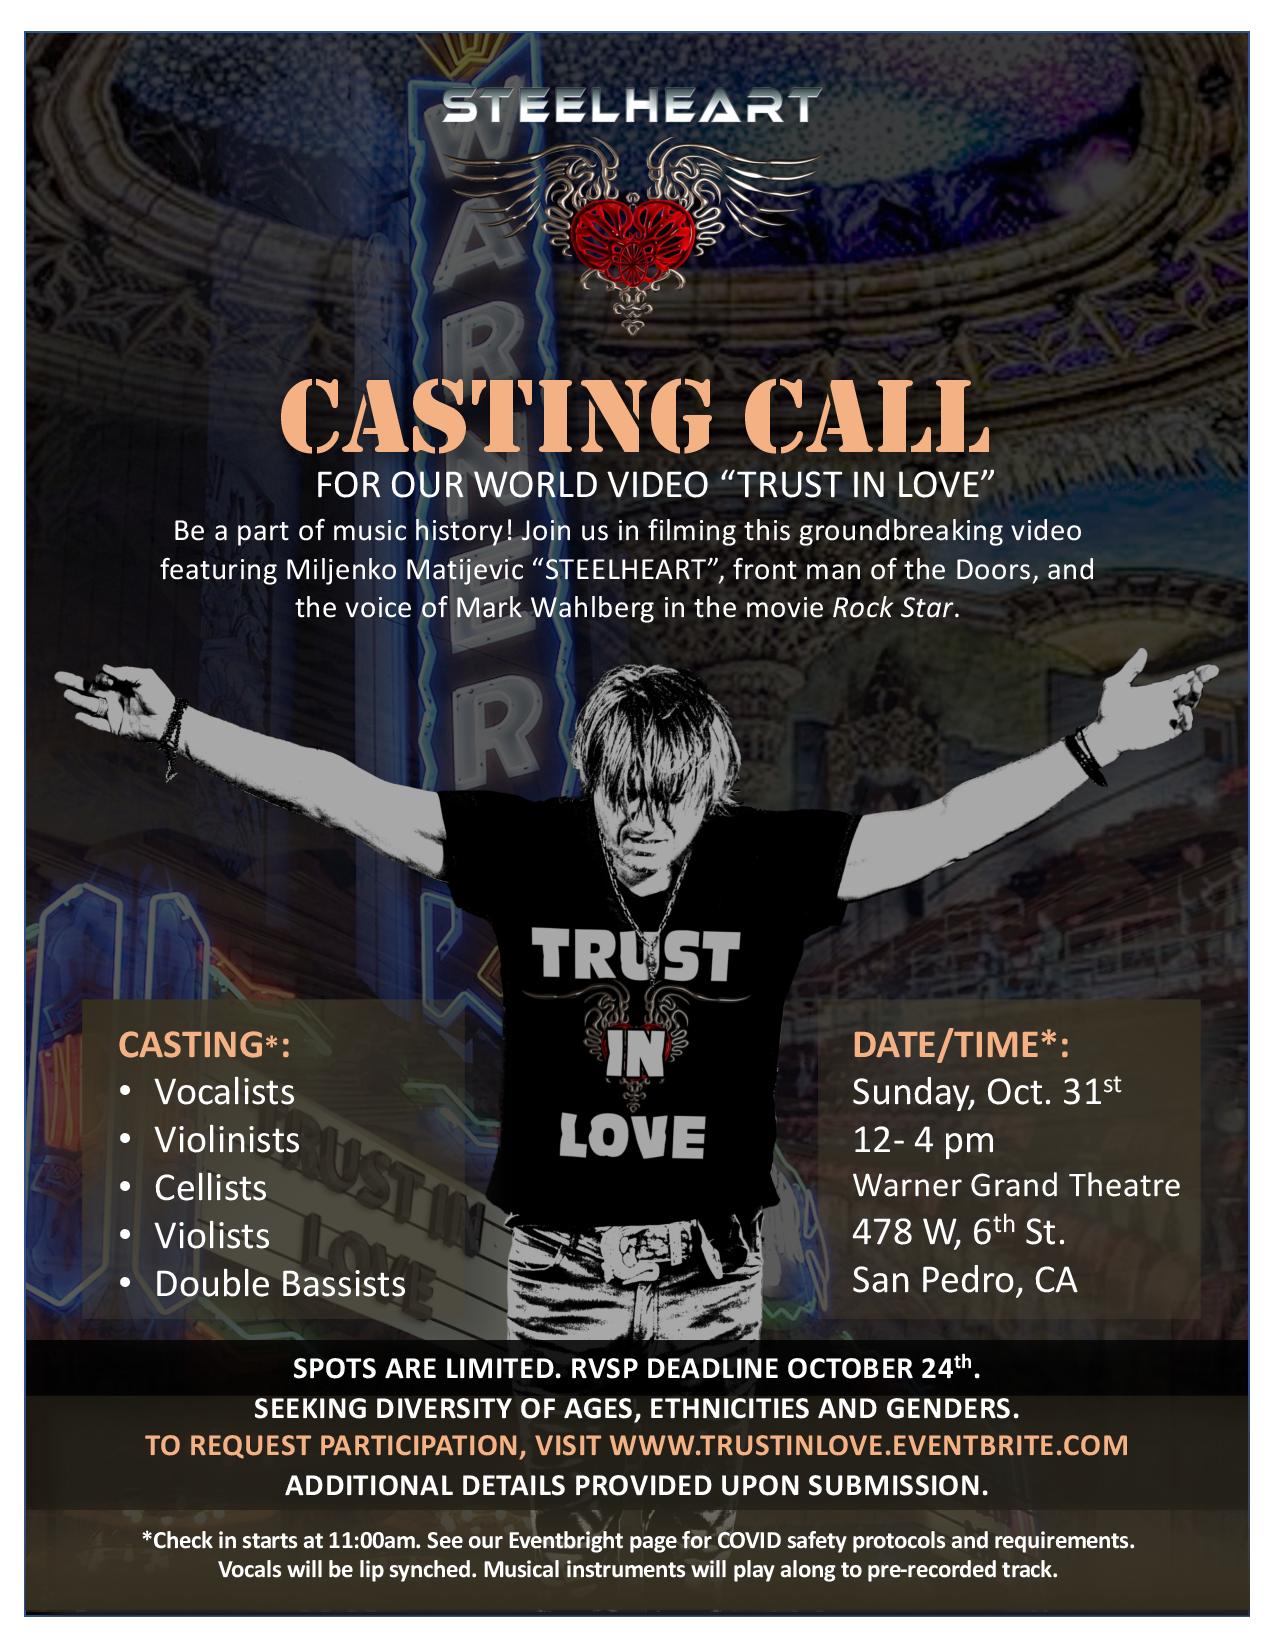 Image of flyer for Trust in Love casting call